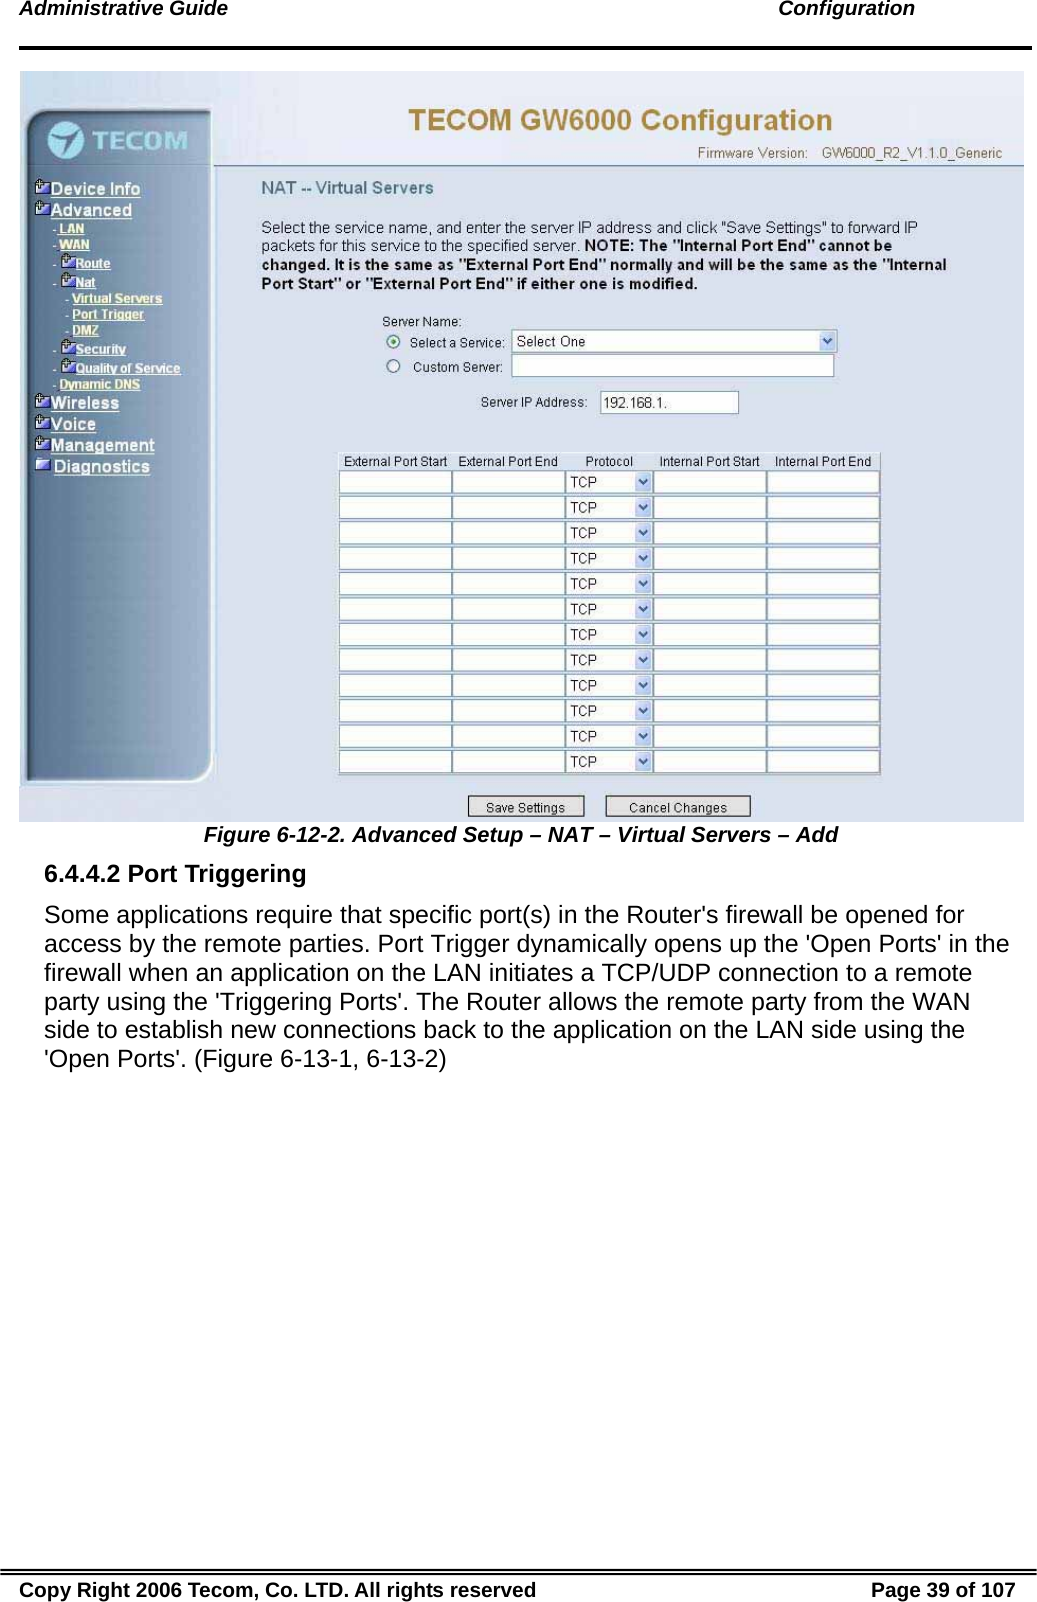 Administrative Guide                                                                                               Configuration  Figure 6-12-2. Advanced Setup – NAT – Virtual Servers – Add 6.4.4.2 Port Triggering Some applications require that specific port(s) in the Router&apos;s firewall be opened for access by the remote parties. Port Trigger dynamically opens up the &apos;Open Ports&apos; in the firewall when an application on the LAN initiates a TCP/UDP connection to a remote party using the &apos;Triggering Ports&apos;. The Router allows the remote party from the WAN side to establish new connections back to the application on the LAN side using the &apos;Open Ports&apos;. (Figure 6-13-1, 6-13-2) Copy Right 2006 Tecom, Co. LTD. All rights reserved  Page 39 of 107 